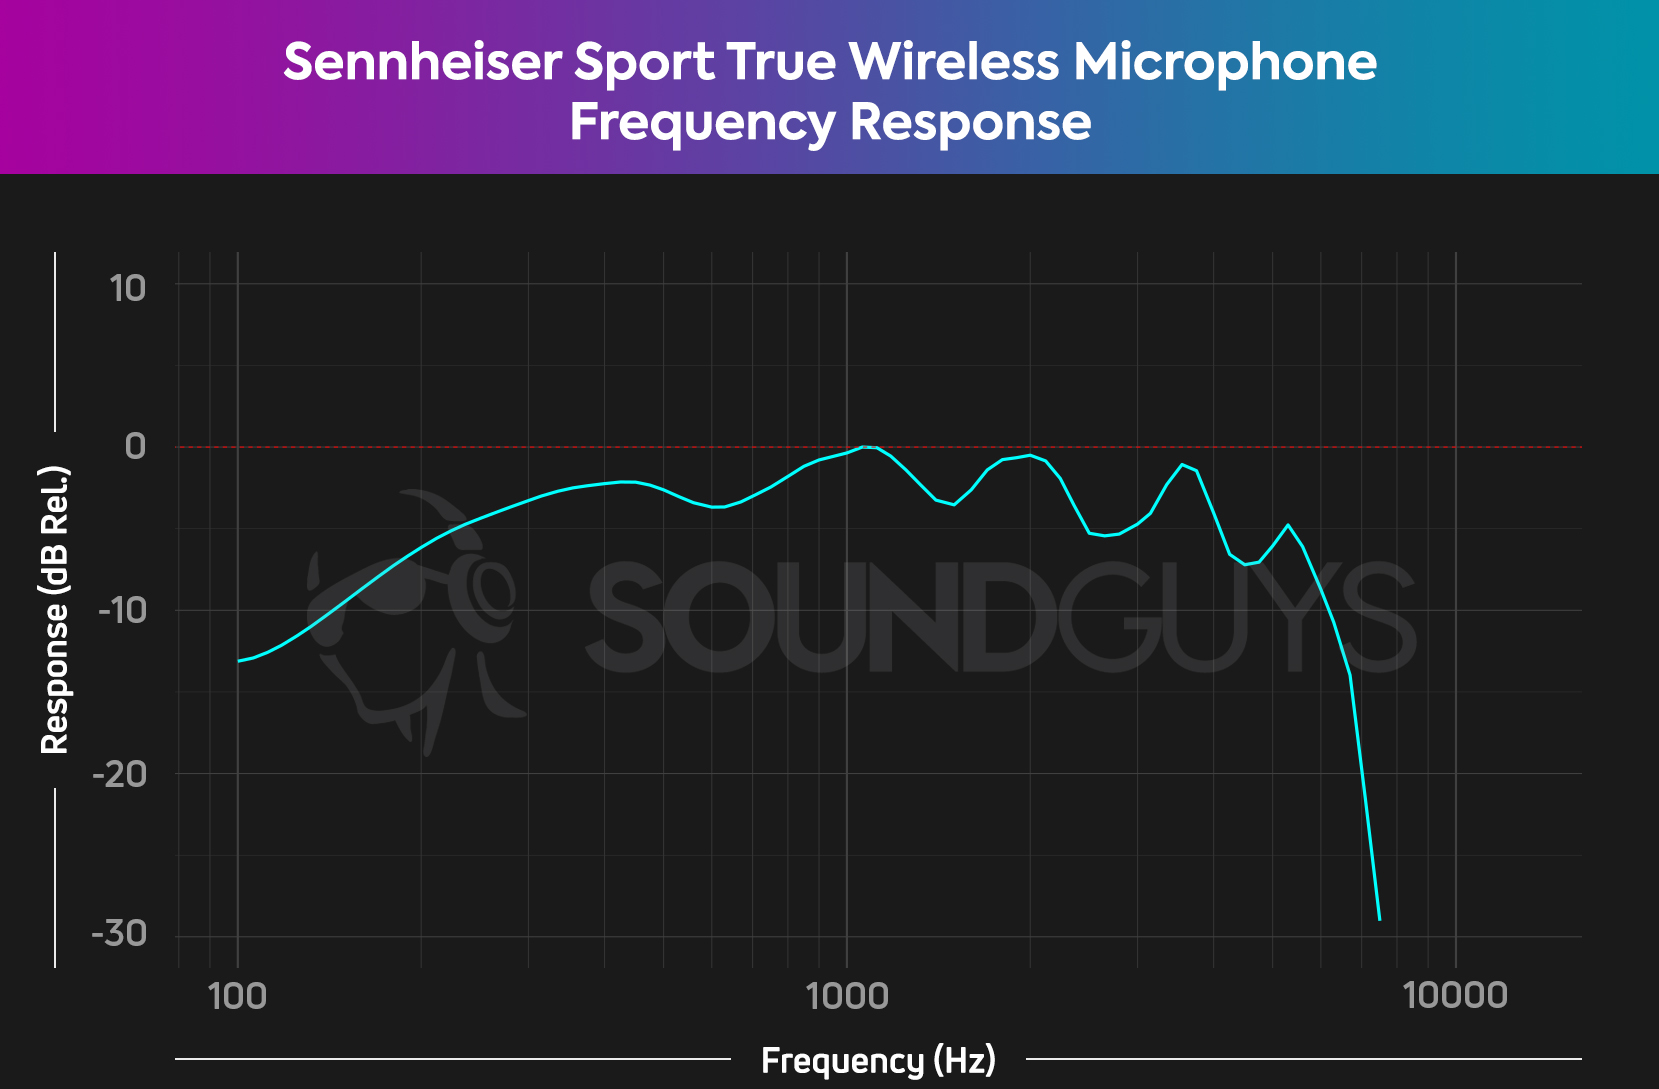 A chart showing the frequency response of the microphone on the Sennheiser Sport True Wireless